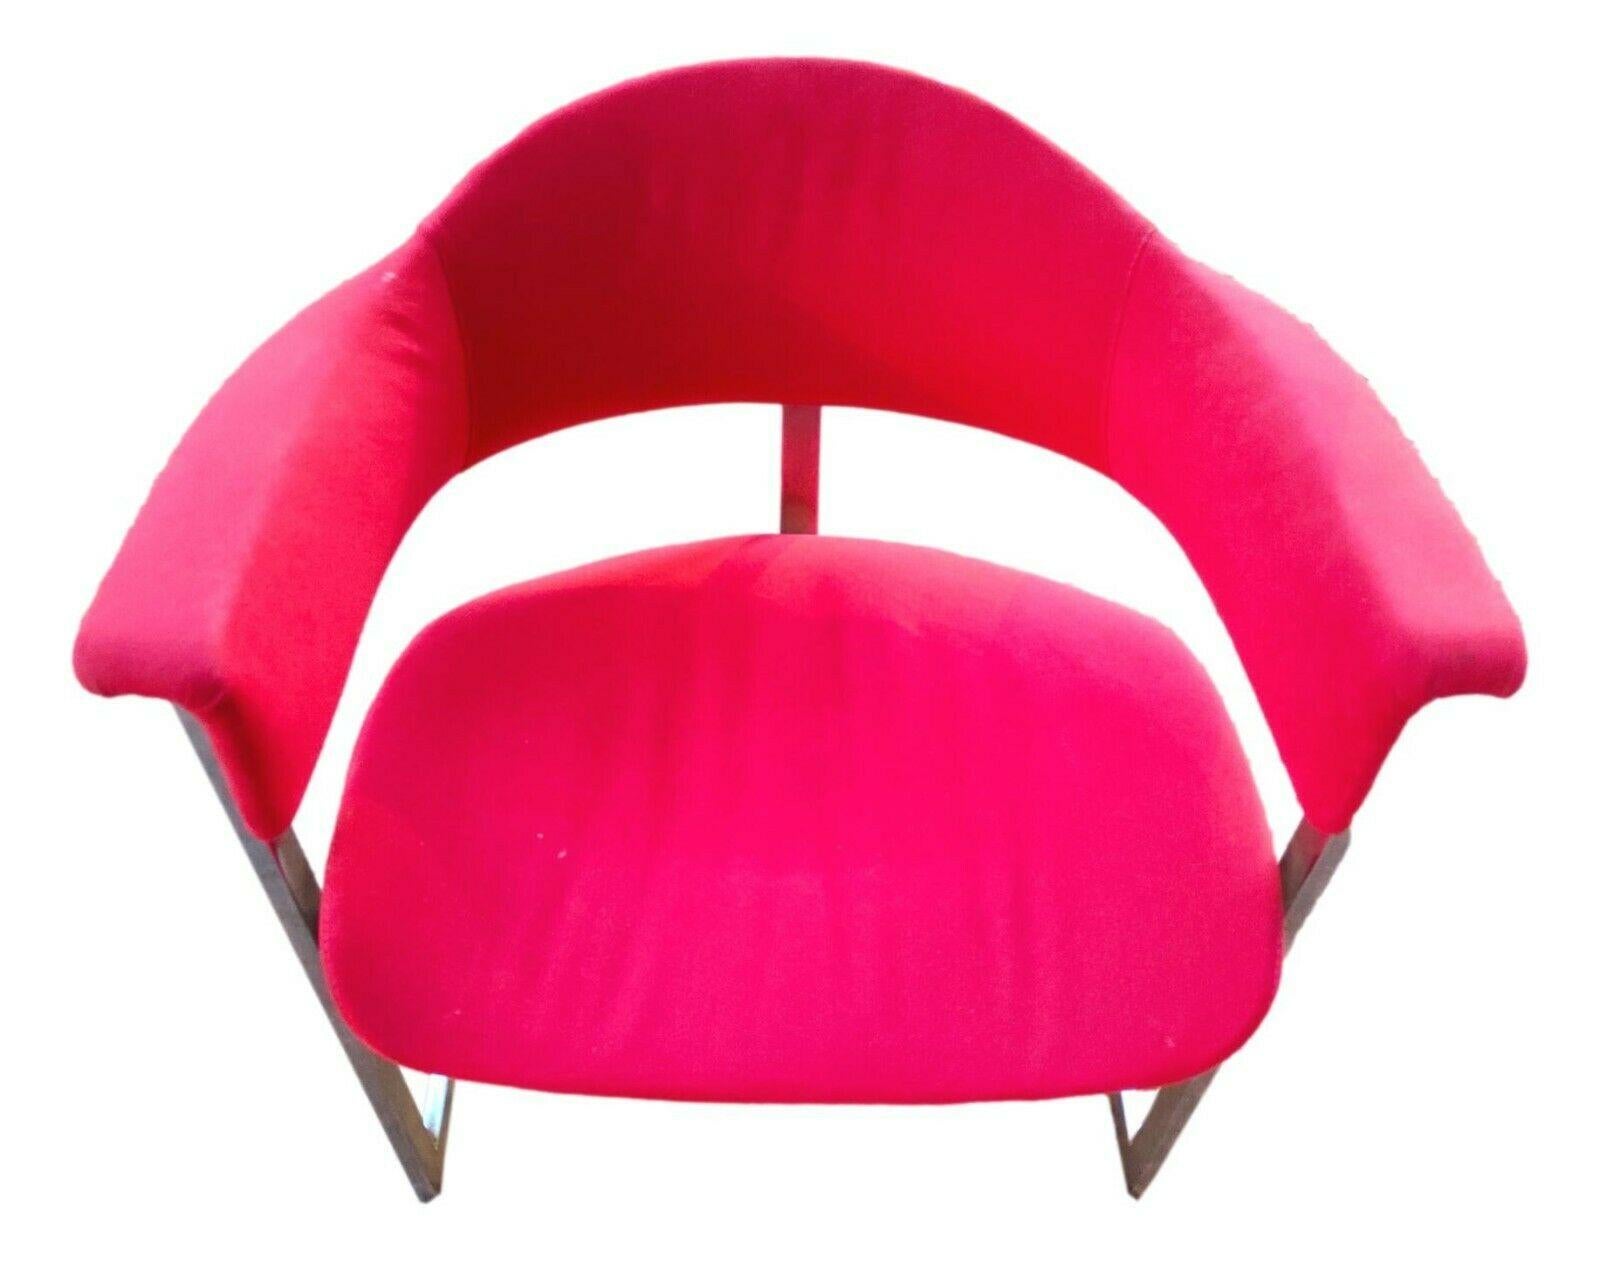 Set of four armchairs designed by Vittorio Introini for Mario Sabot, 1970s.

Chromed steel structure, seat and back upholstery in fuchsia cloth.

They measure 70 cm in height, 64 cm in width, 55 cm in depth and 40 cm in height of the seat from